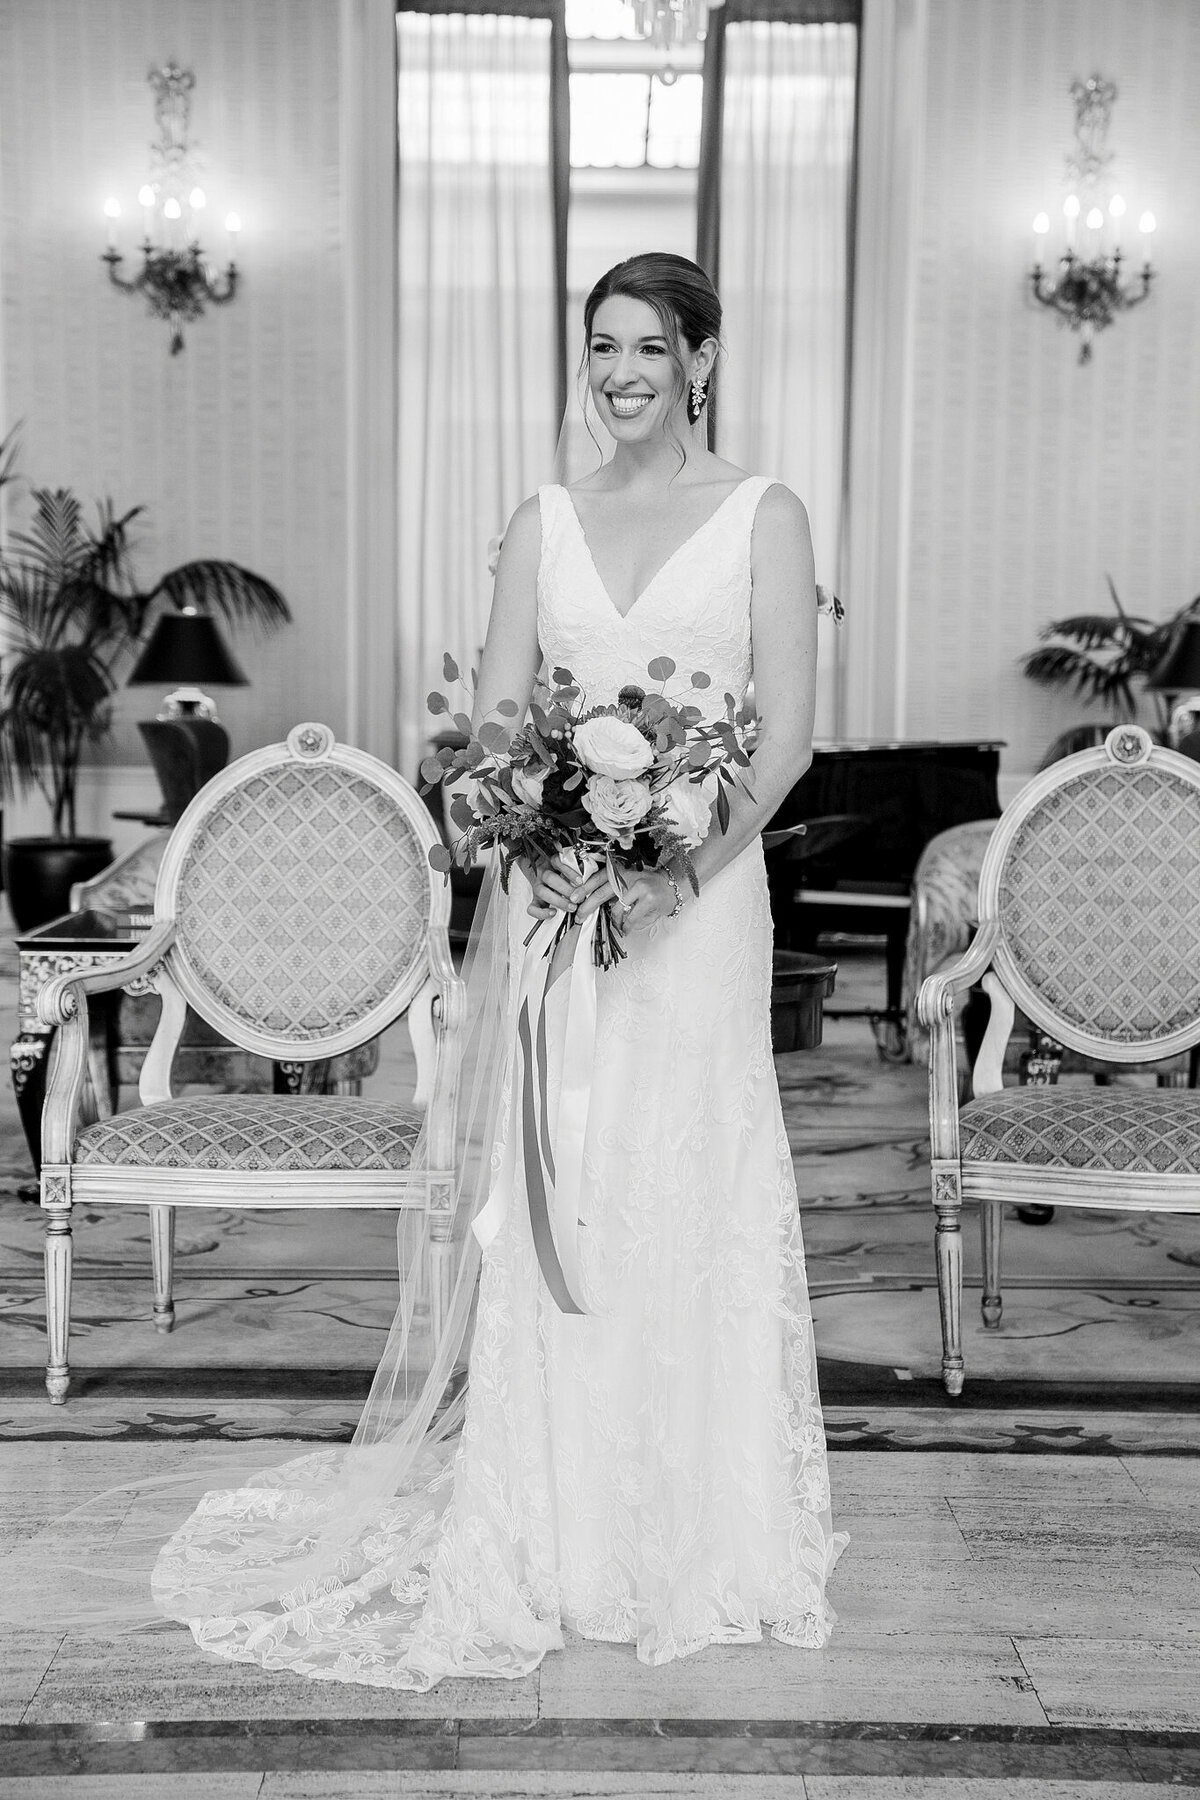 Black and white portrait of bride with bouquet